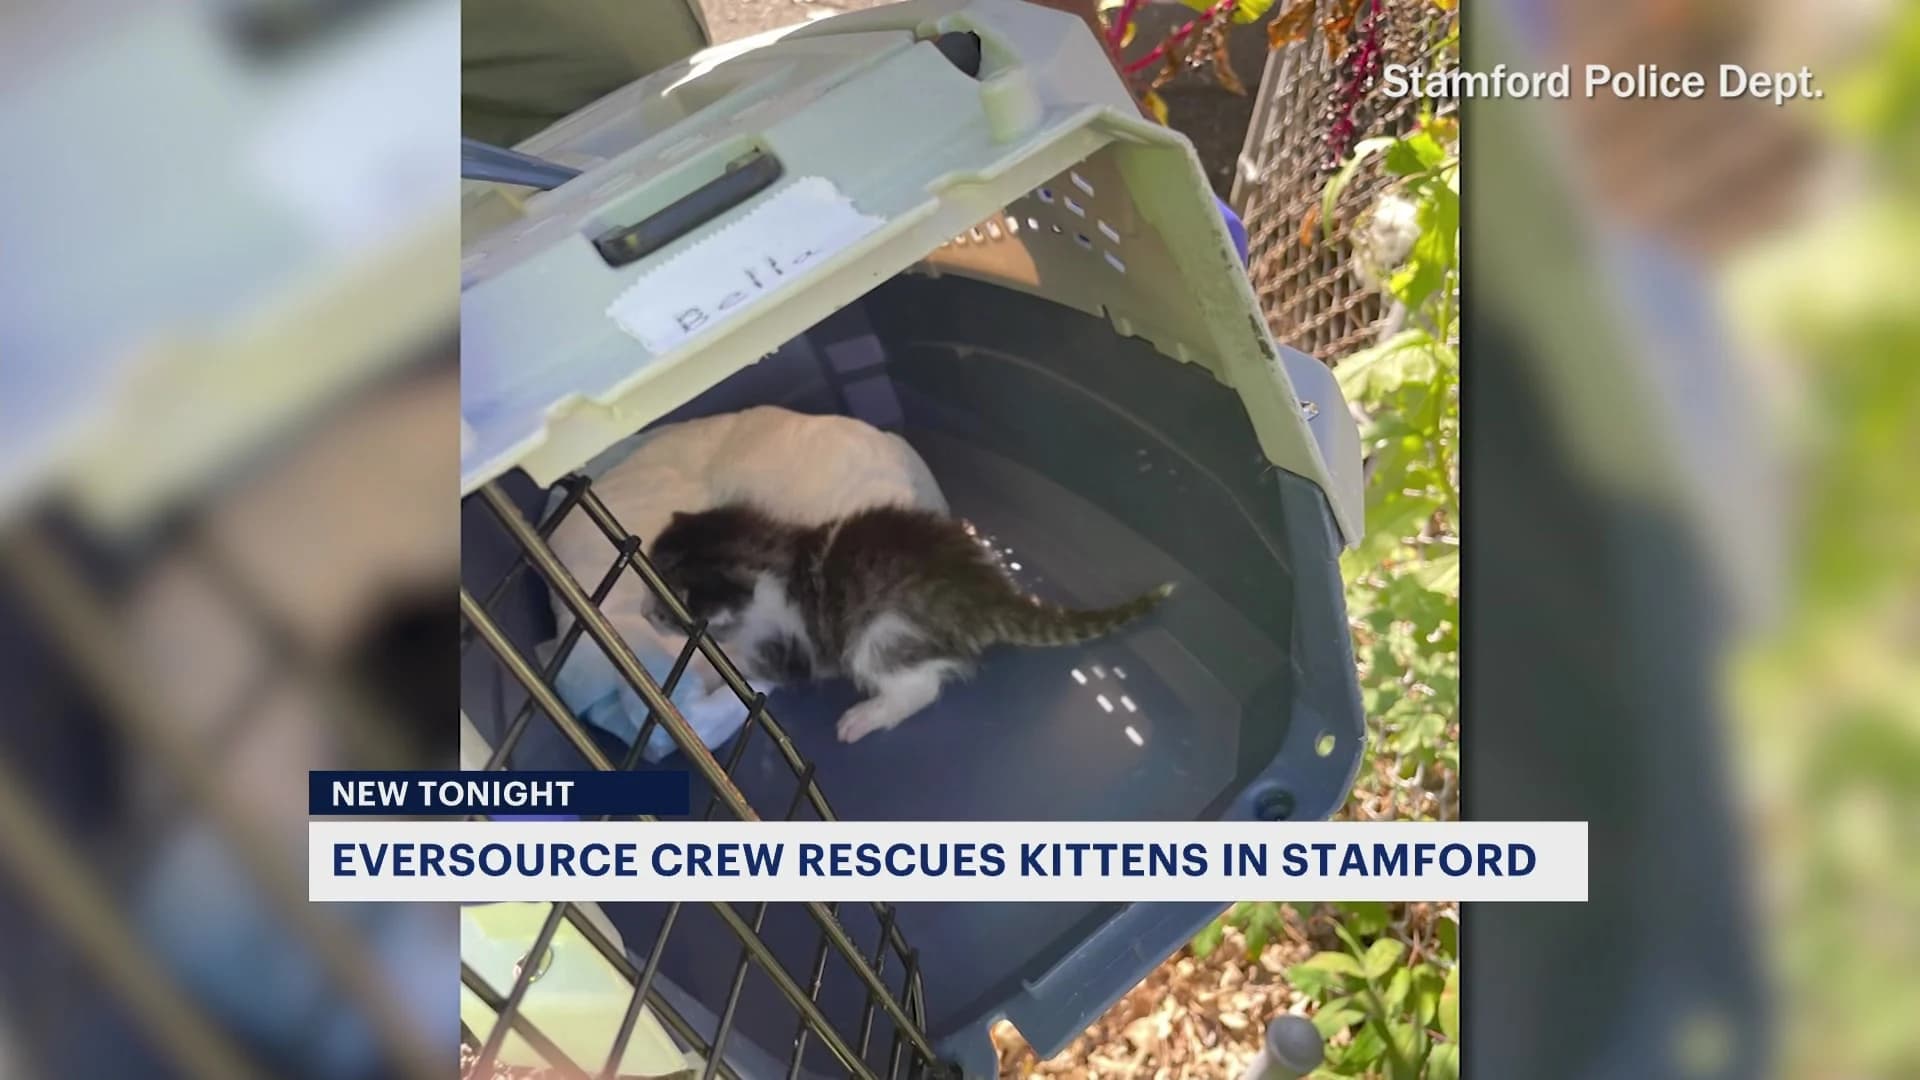 Eversource crew rescues kittens from high voltage area in Stamford